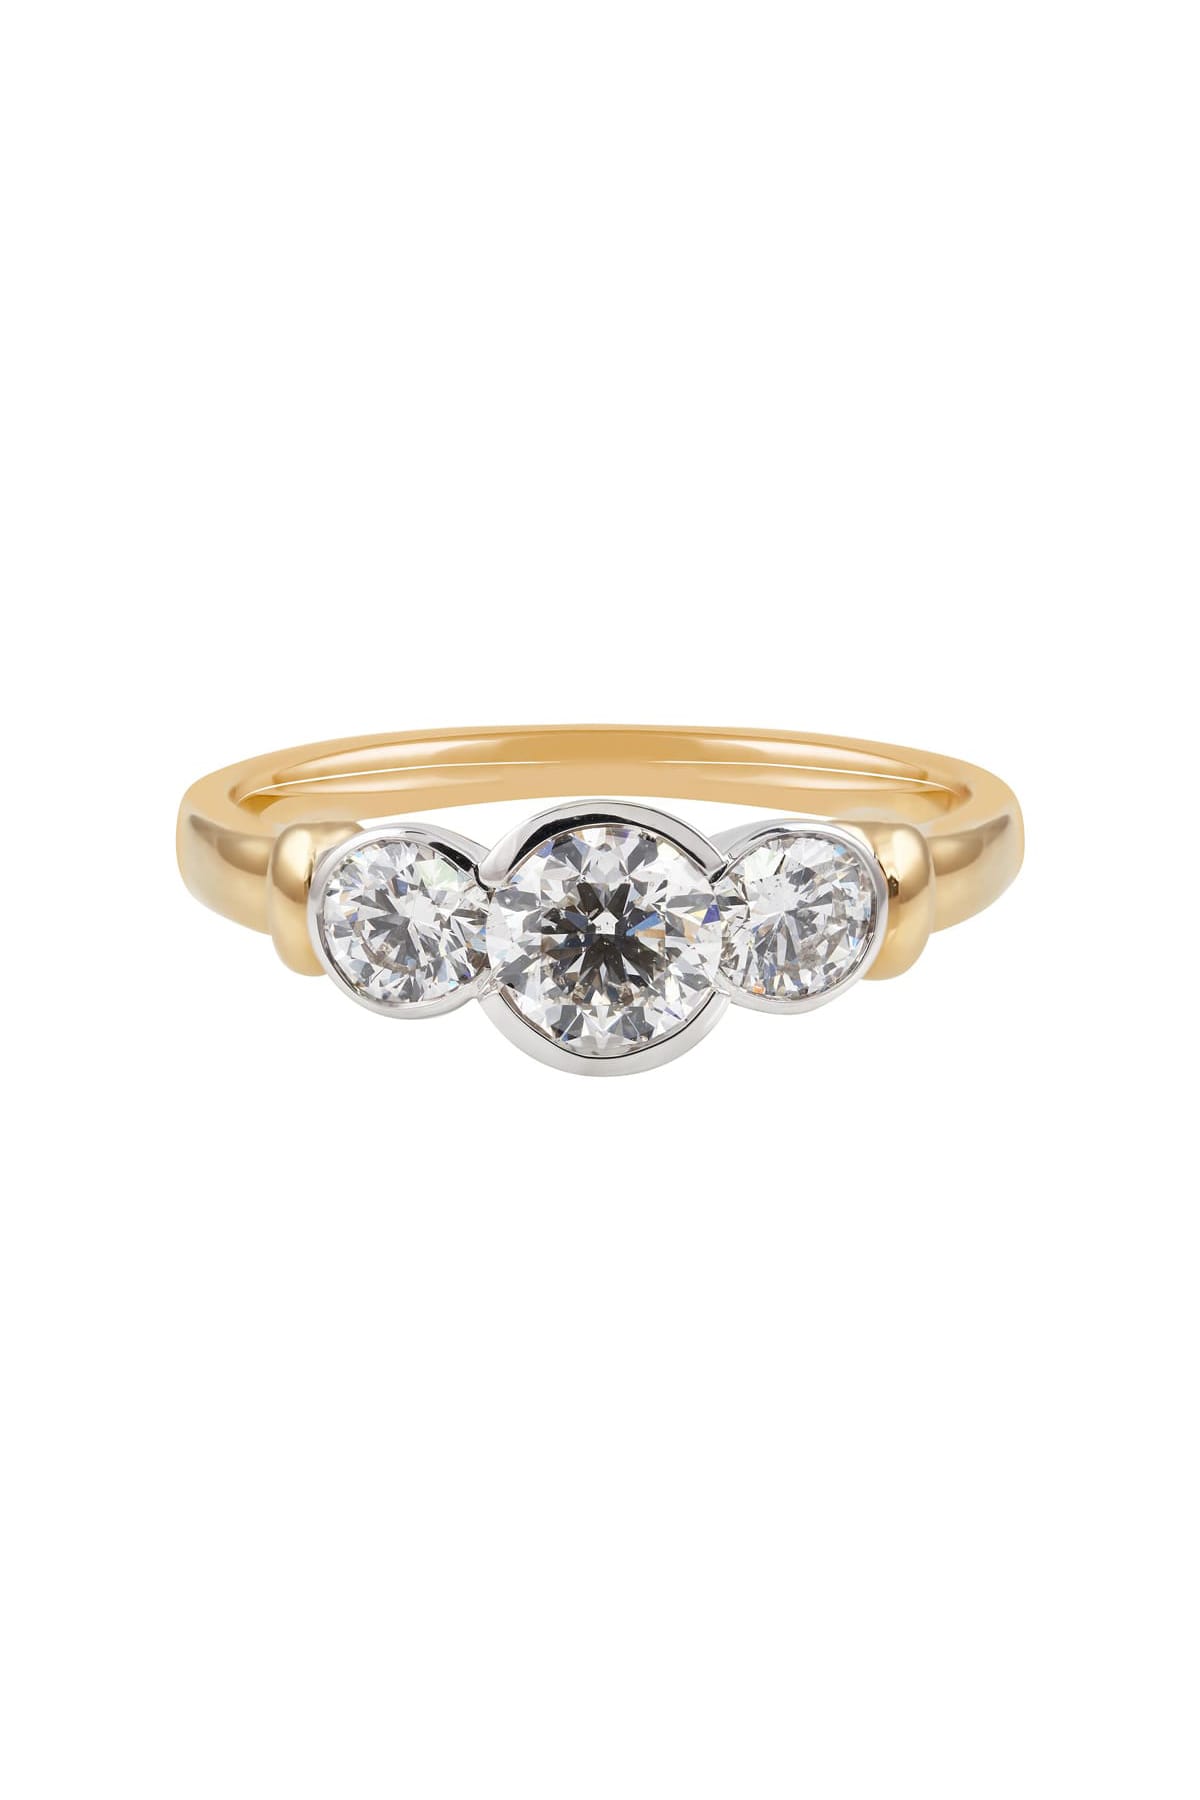 1.00ct Diamond Set Ring set in 18ct Yellow and White Gold available at LeGassick Diamonds and Jewellery Gold Coast, Australia.